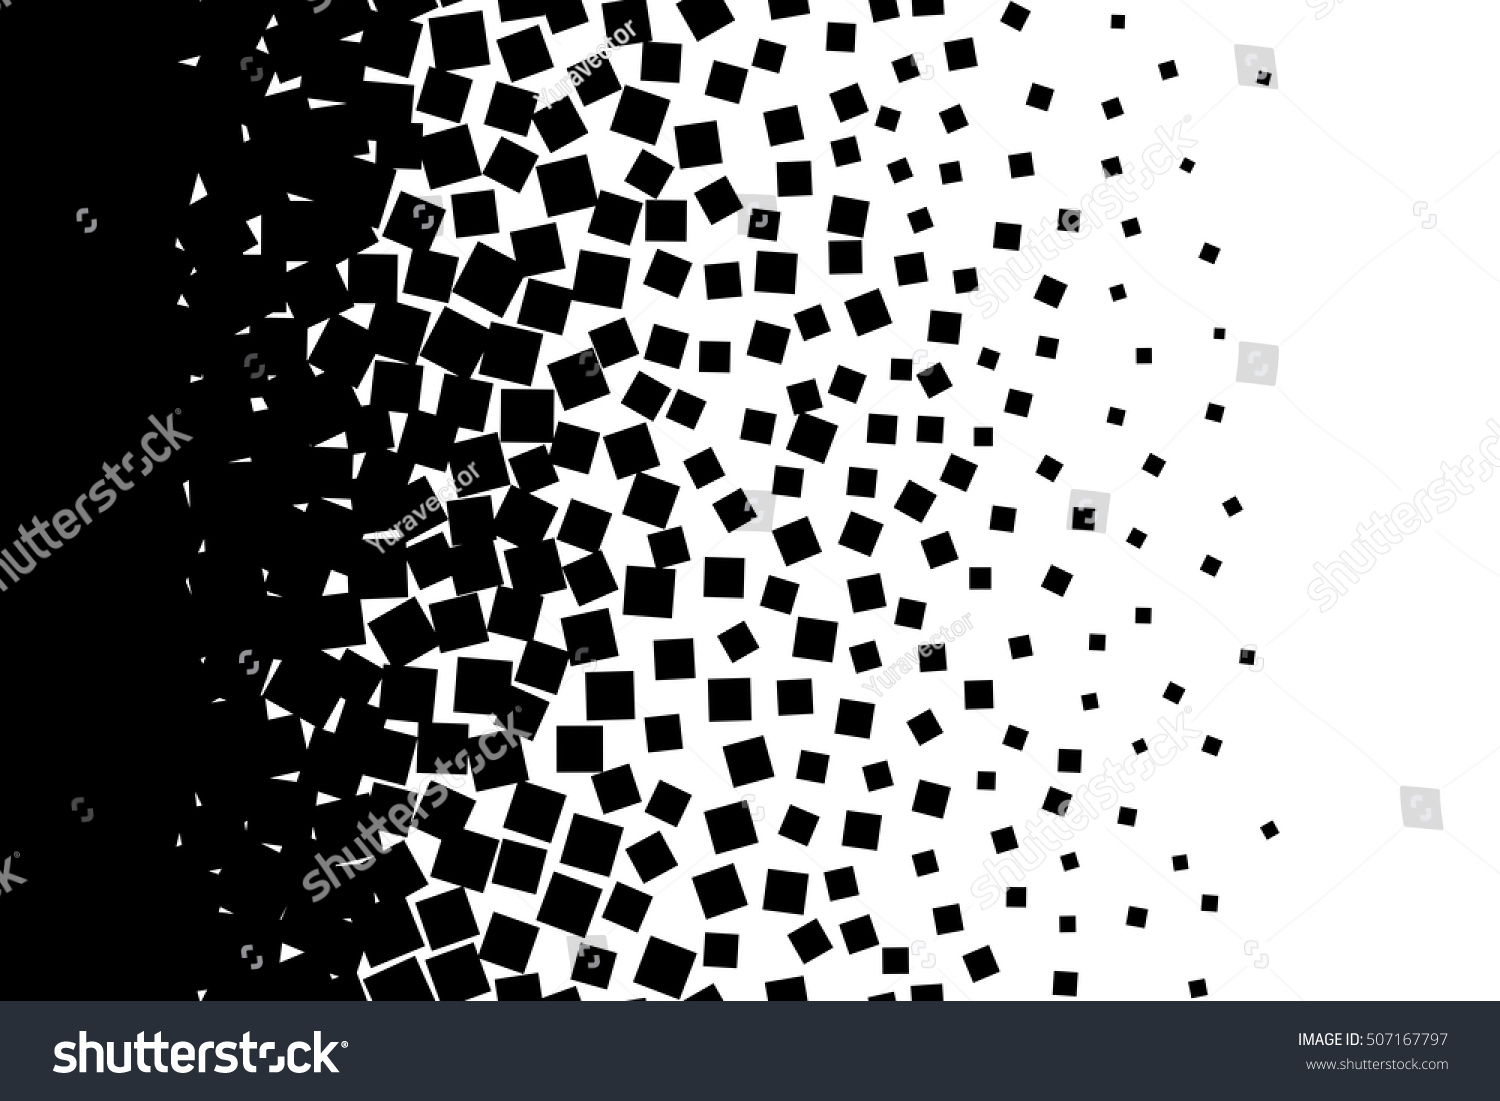 Abstract Background Isolated Black Elements On Image vectorielle de